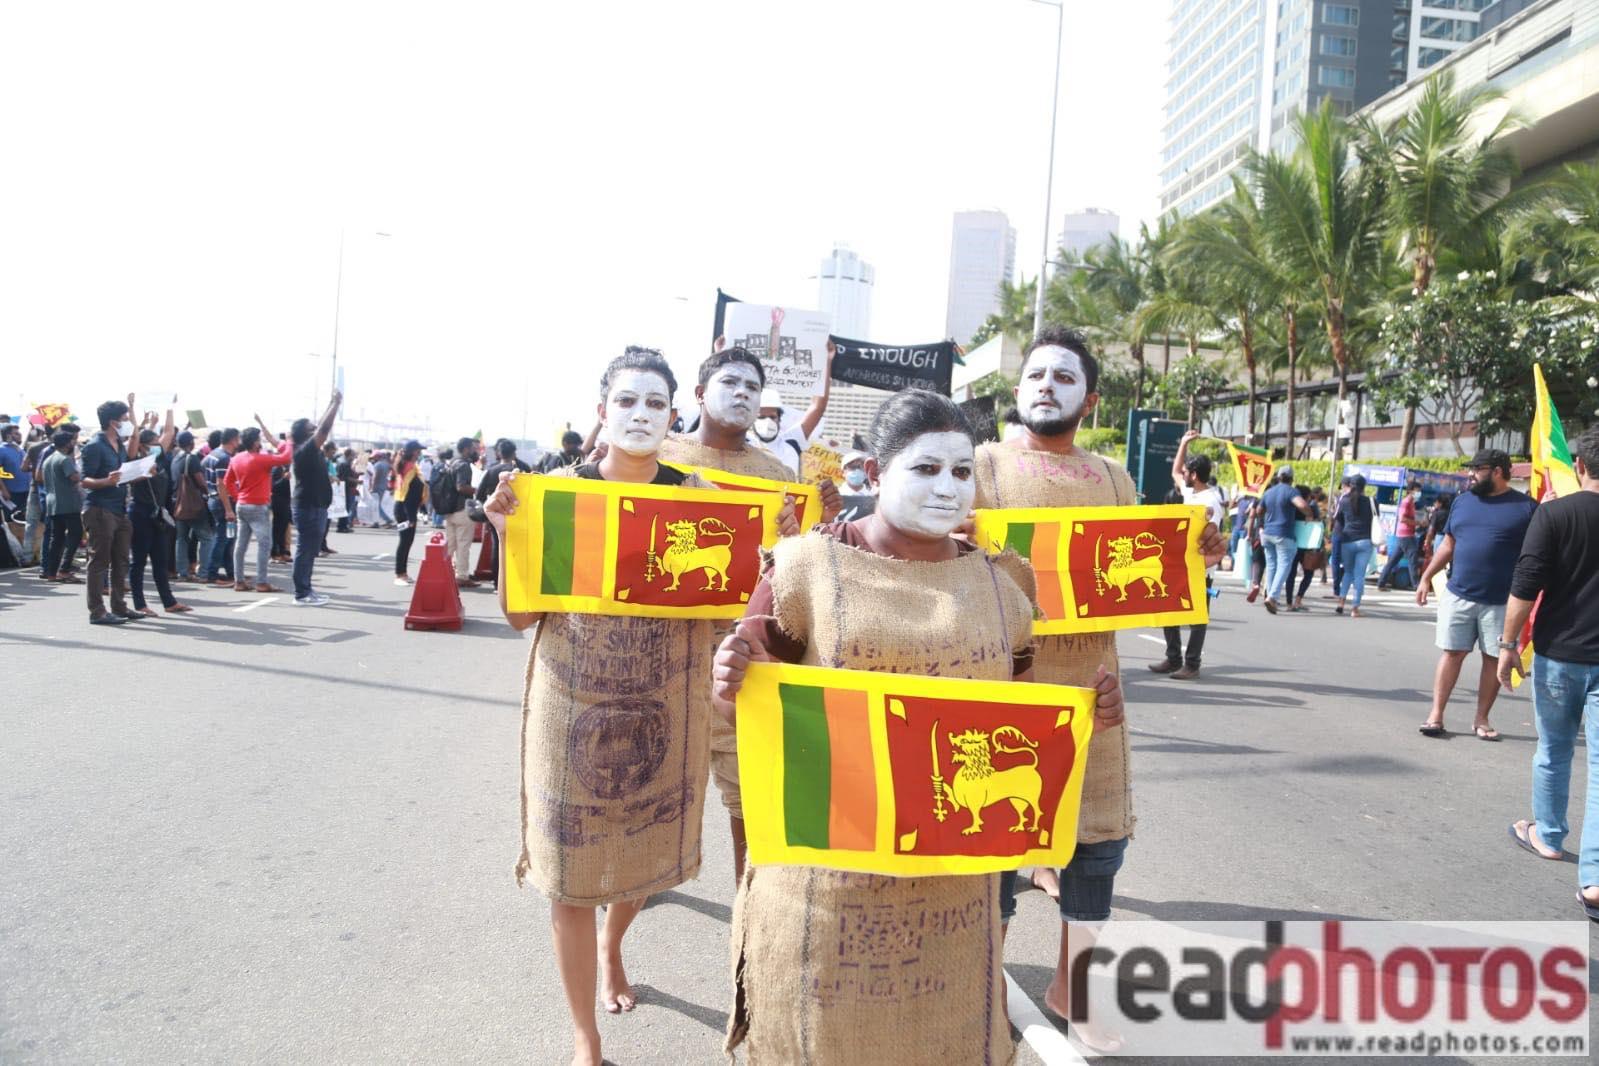 Protests against government at Galle Face Green - 09.04.2022